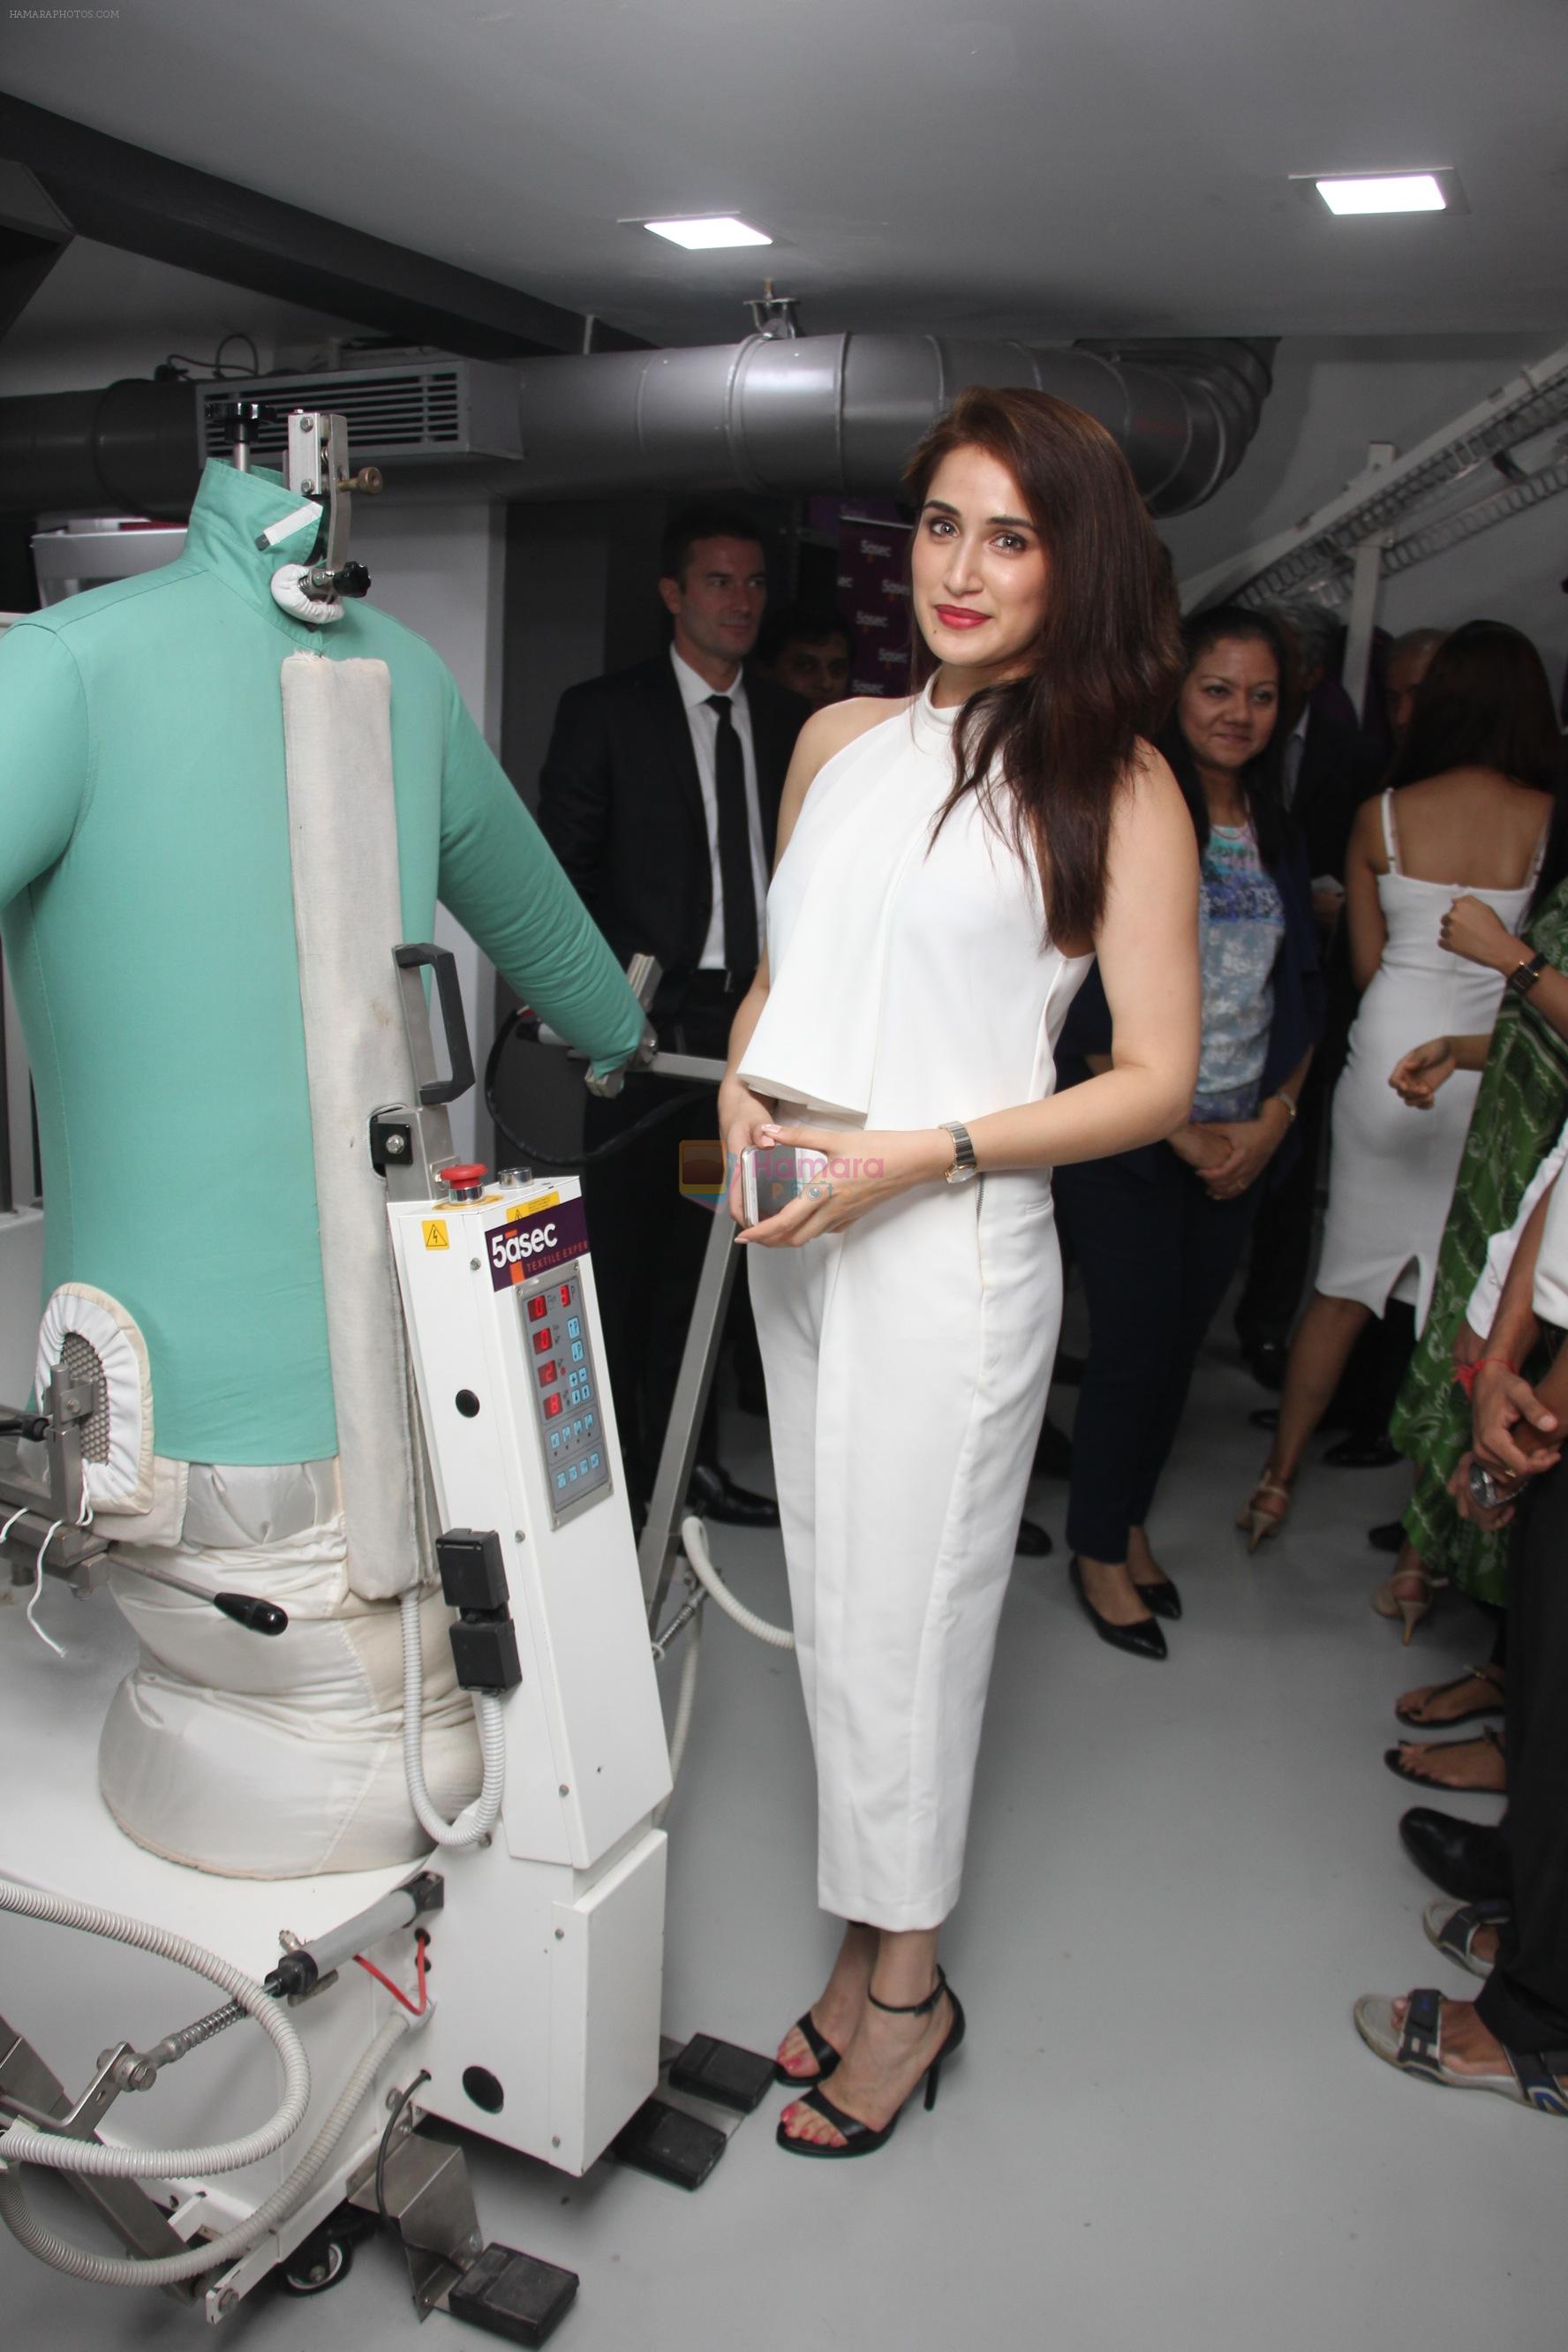 Sagarika Ghatge during the launch event of 5aSec Worli Store